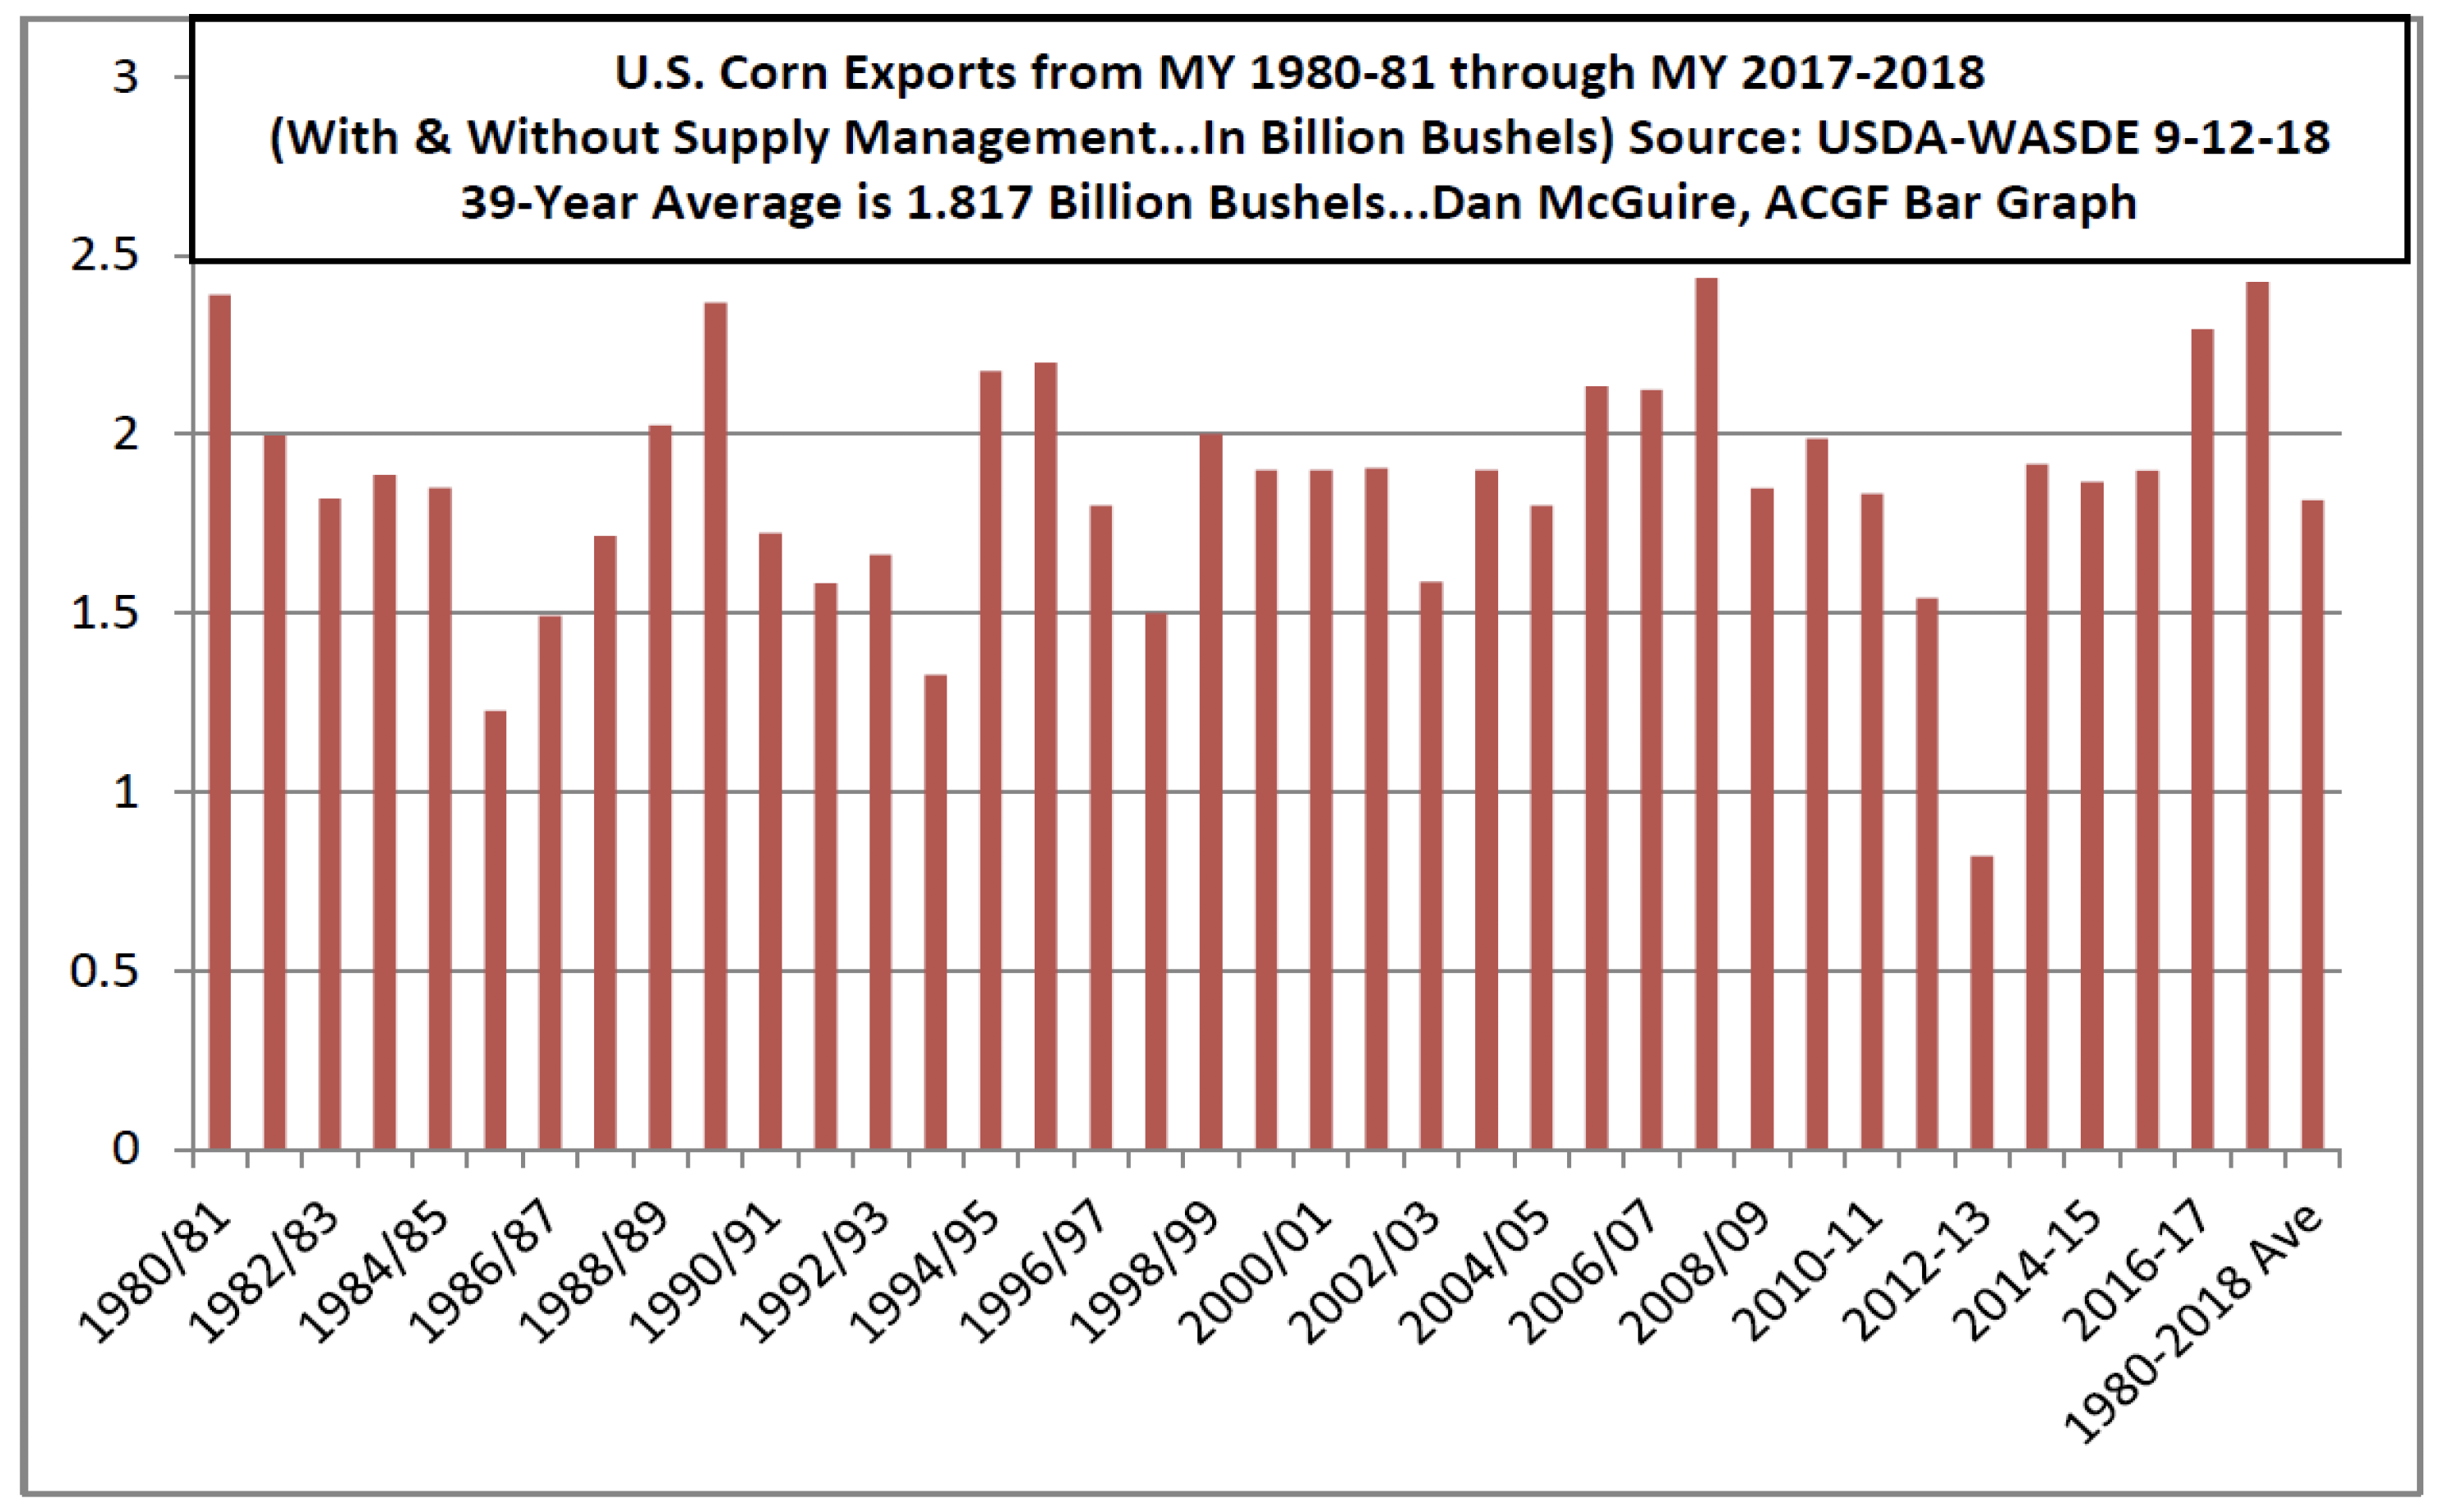 U.S. Corn Exports from MY 1980-81 through MY 2017-18